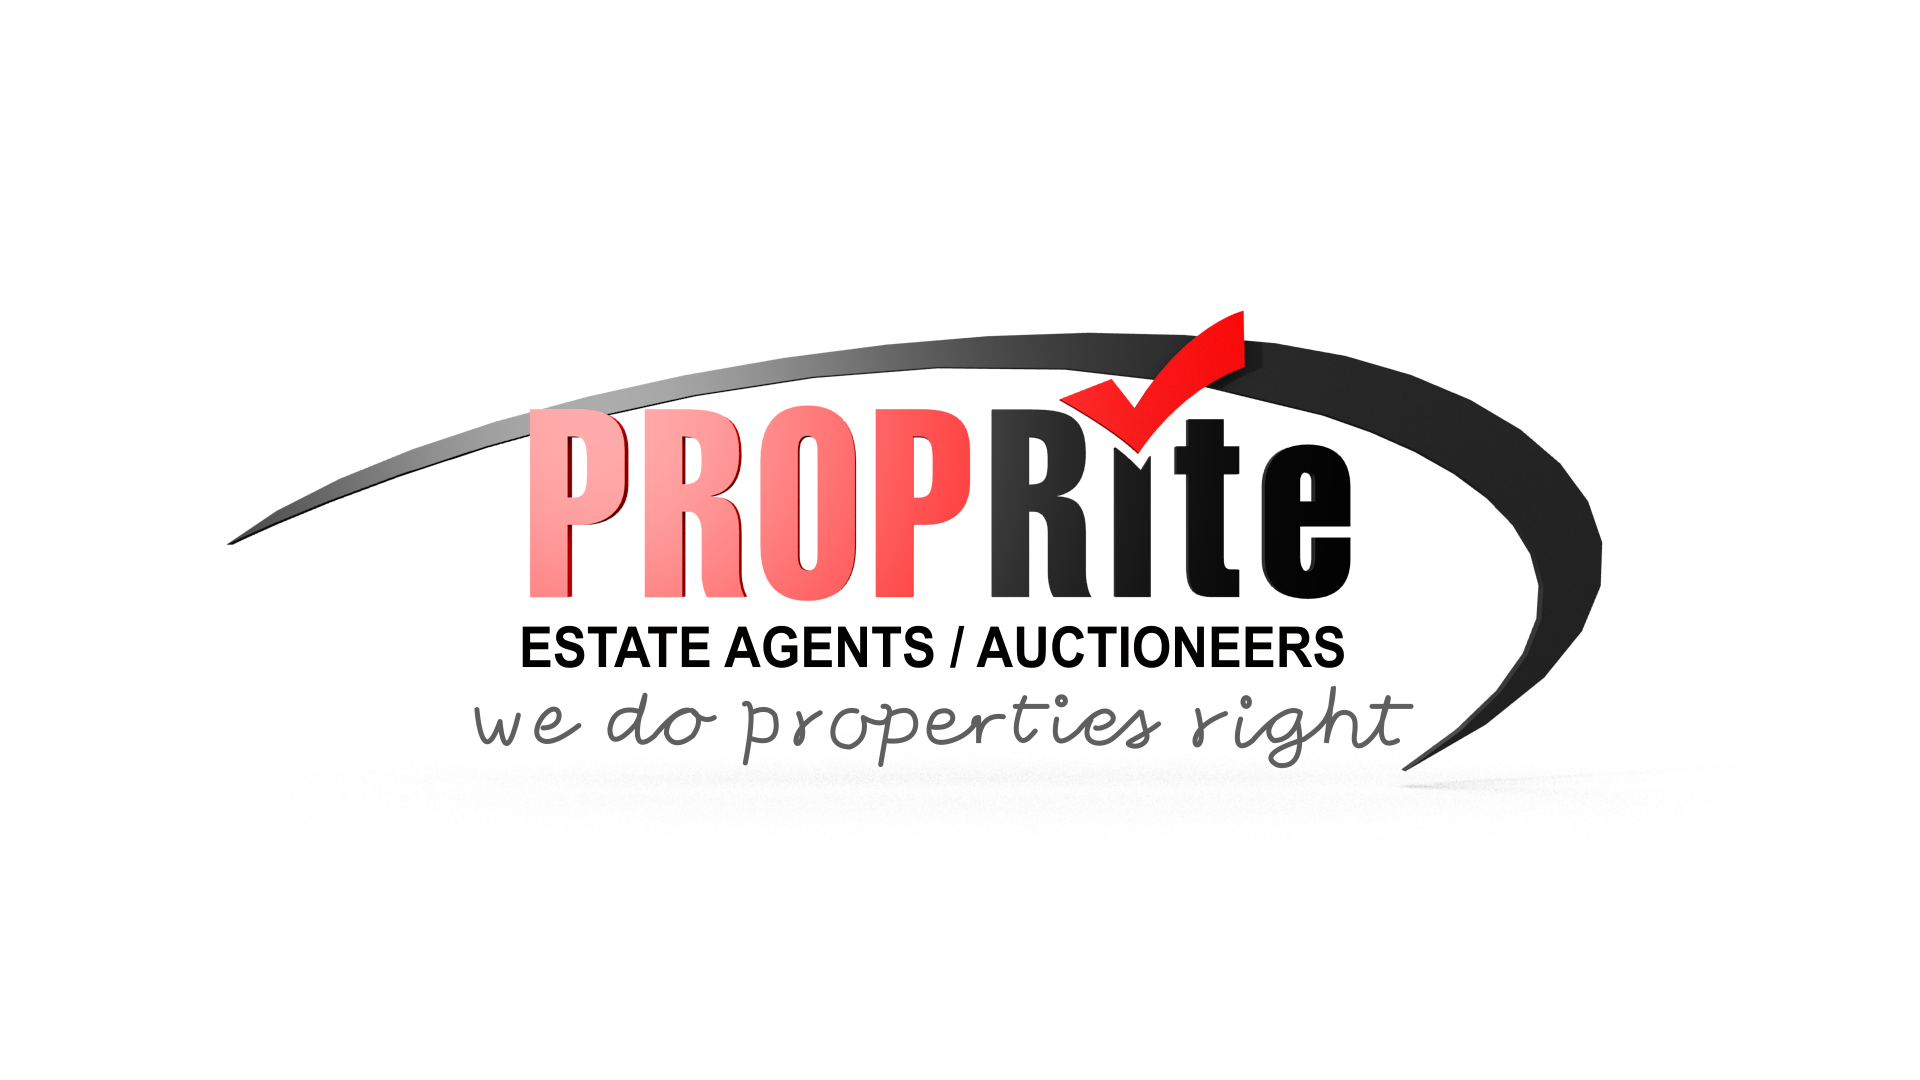 Proprite Estate Agents and Auctioneers